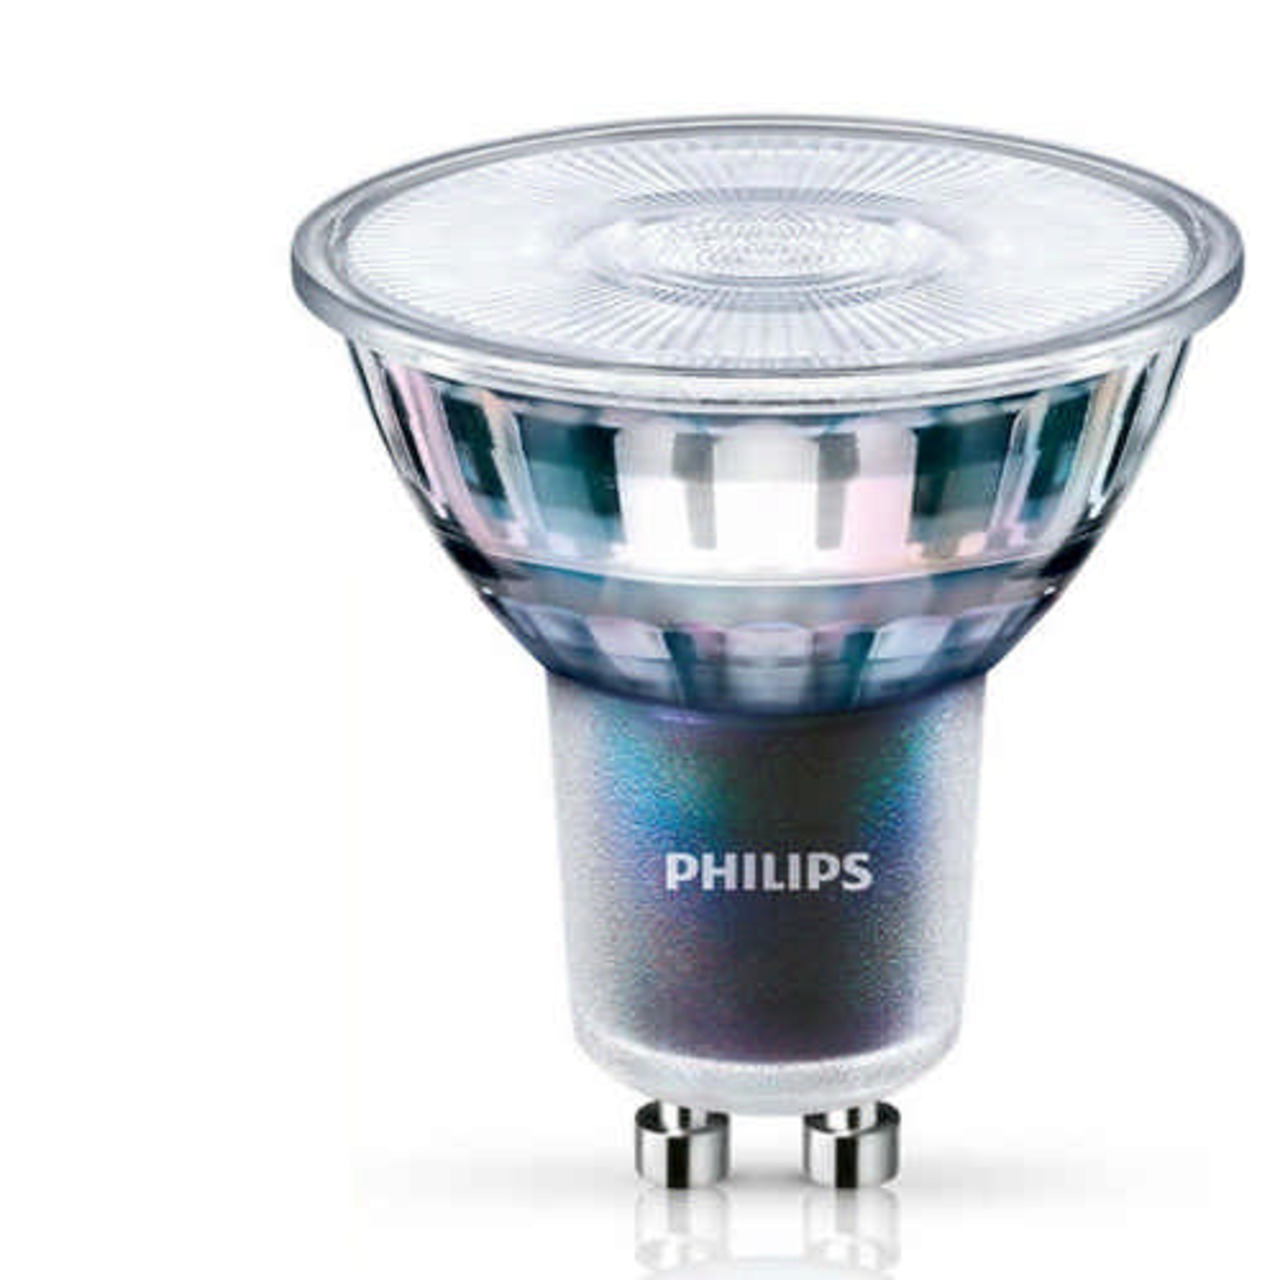 Philips MASTER ExpertColor 5-5-W-GU10-LED-Lampe- 355 lm- 97 Ra- 25- 2700K- warmweiss- dimmbar unter Beleuchtung